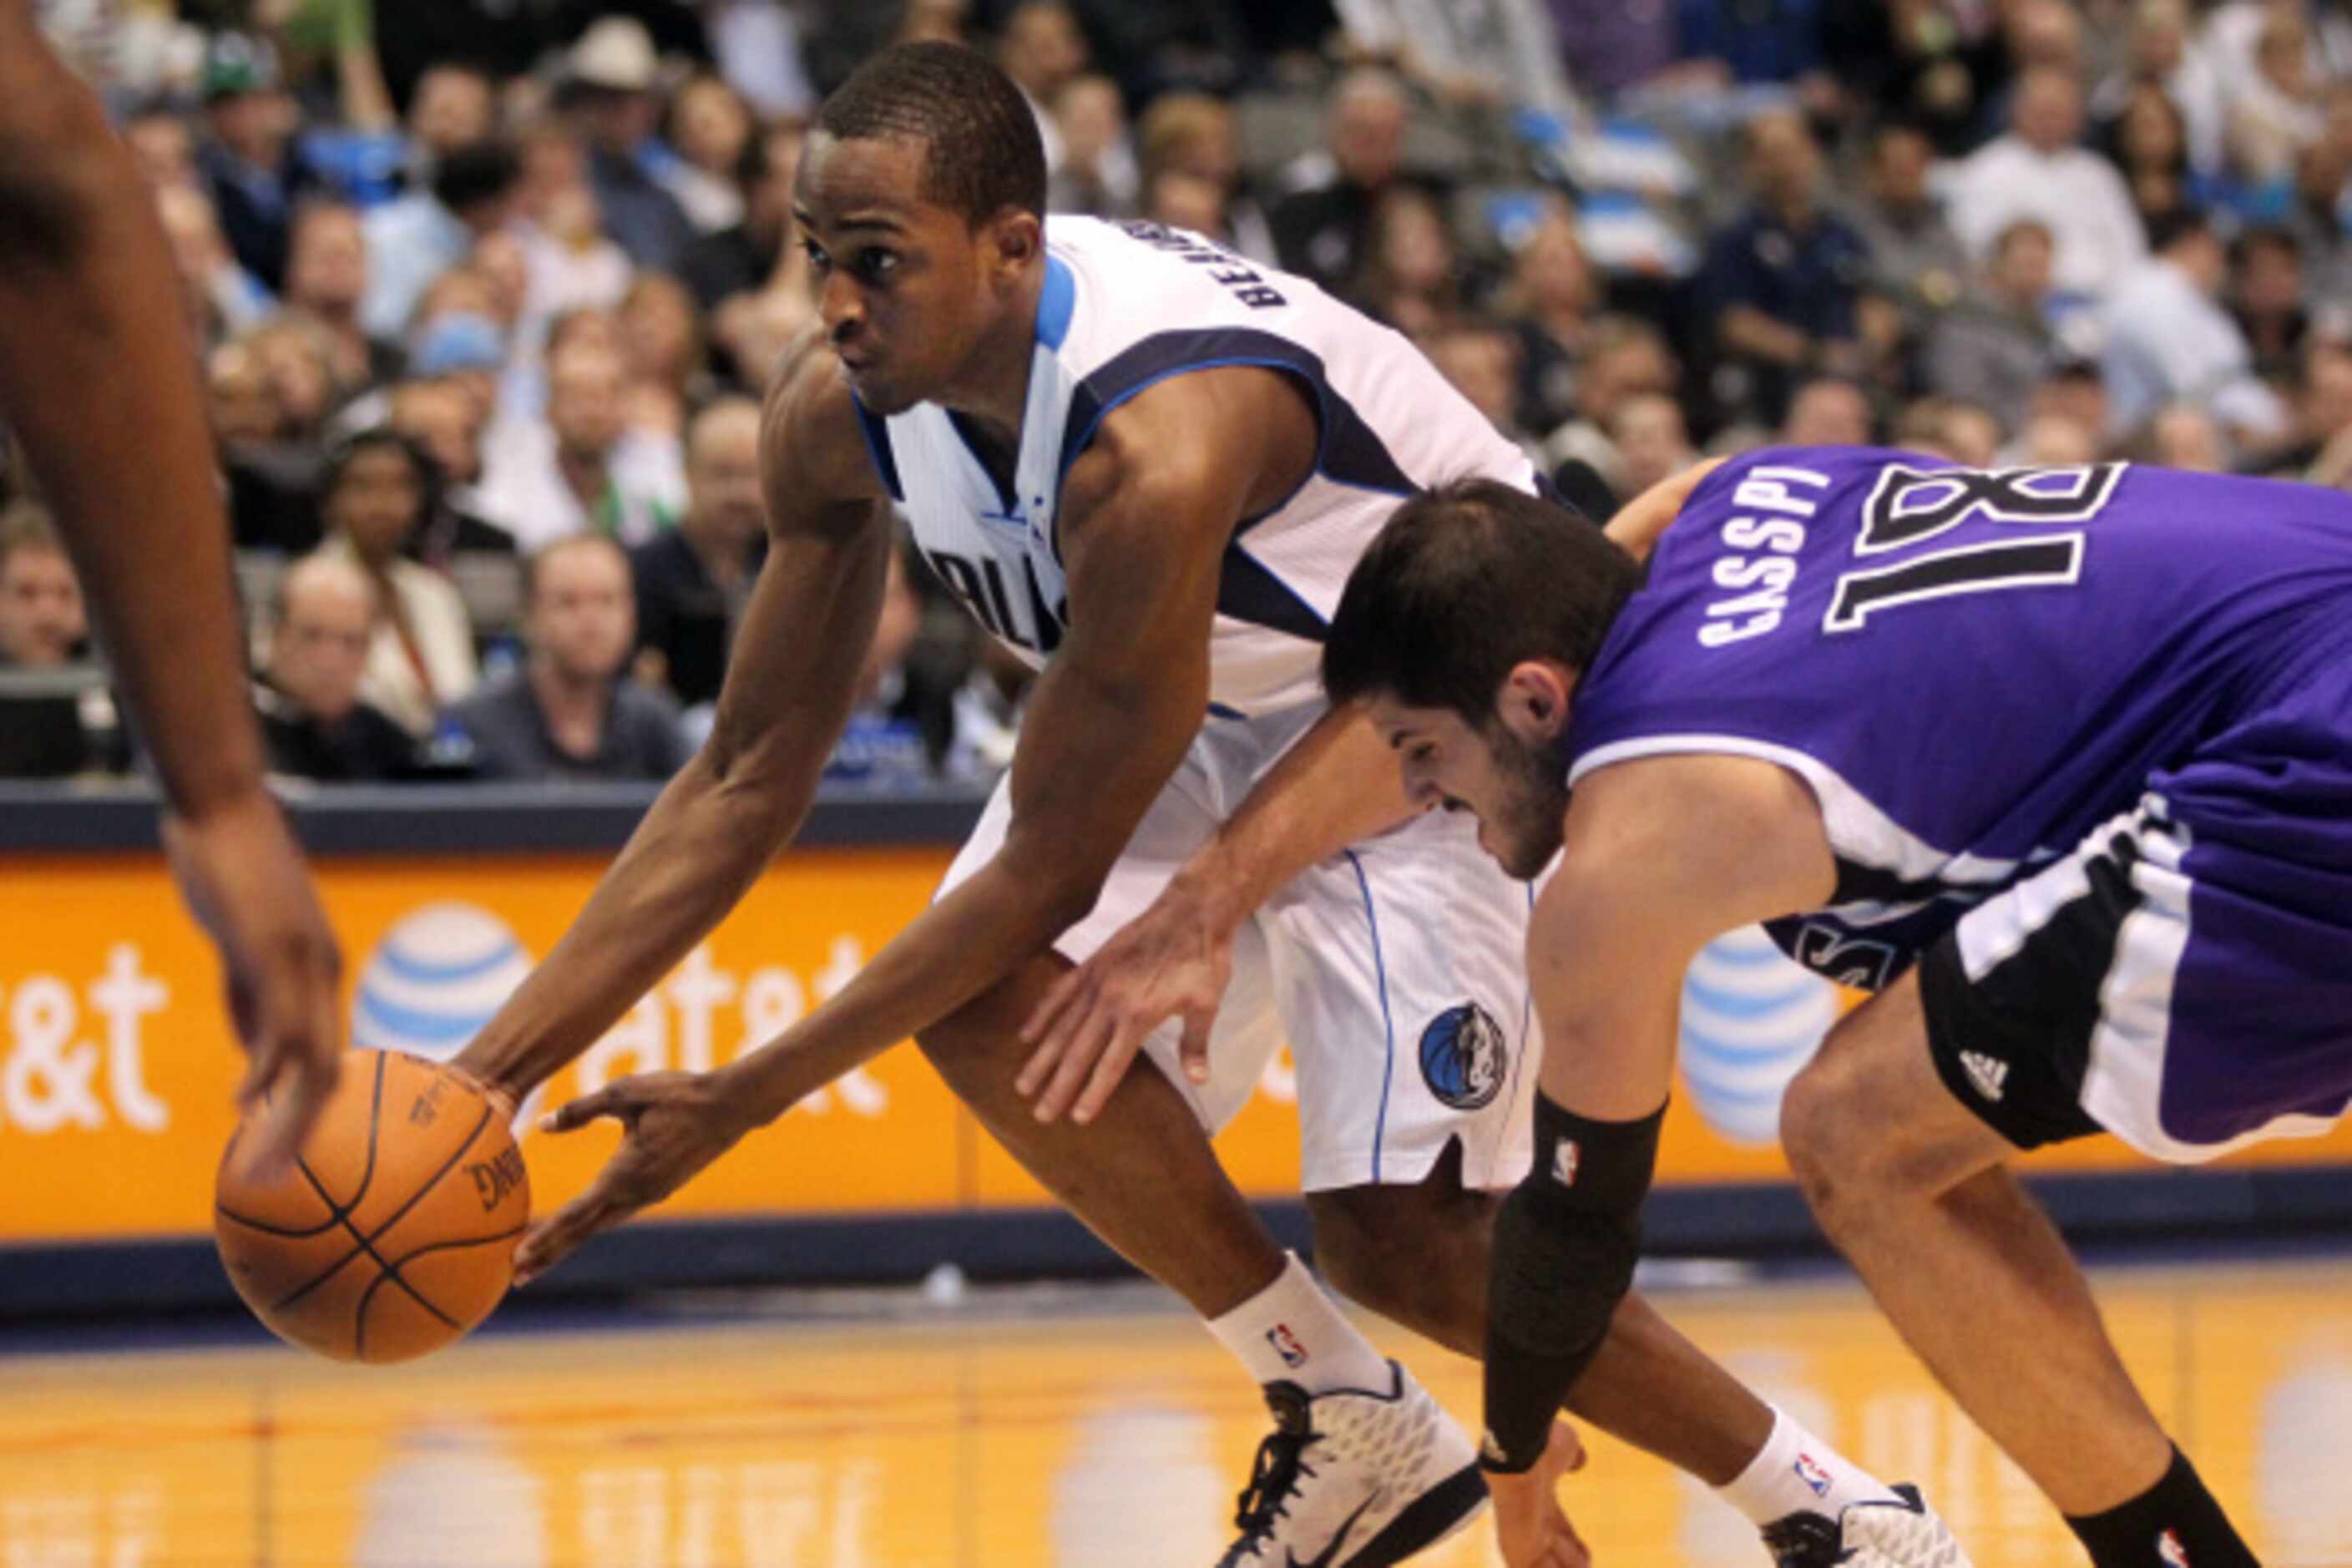 Feb. 16: Projected starting shooting guard Roddy Beaubois returns from 54-game absence due...